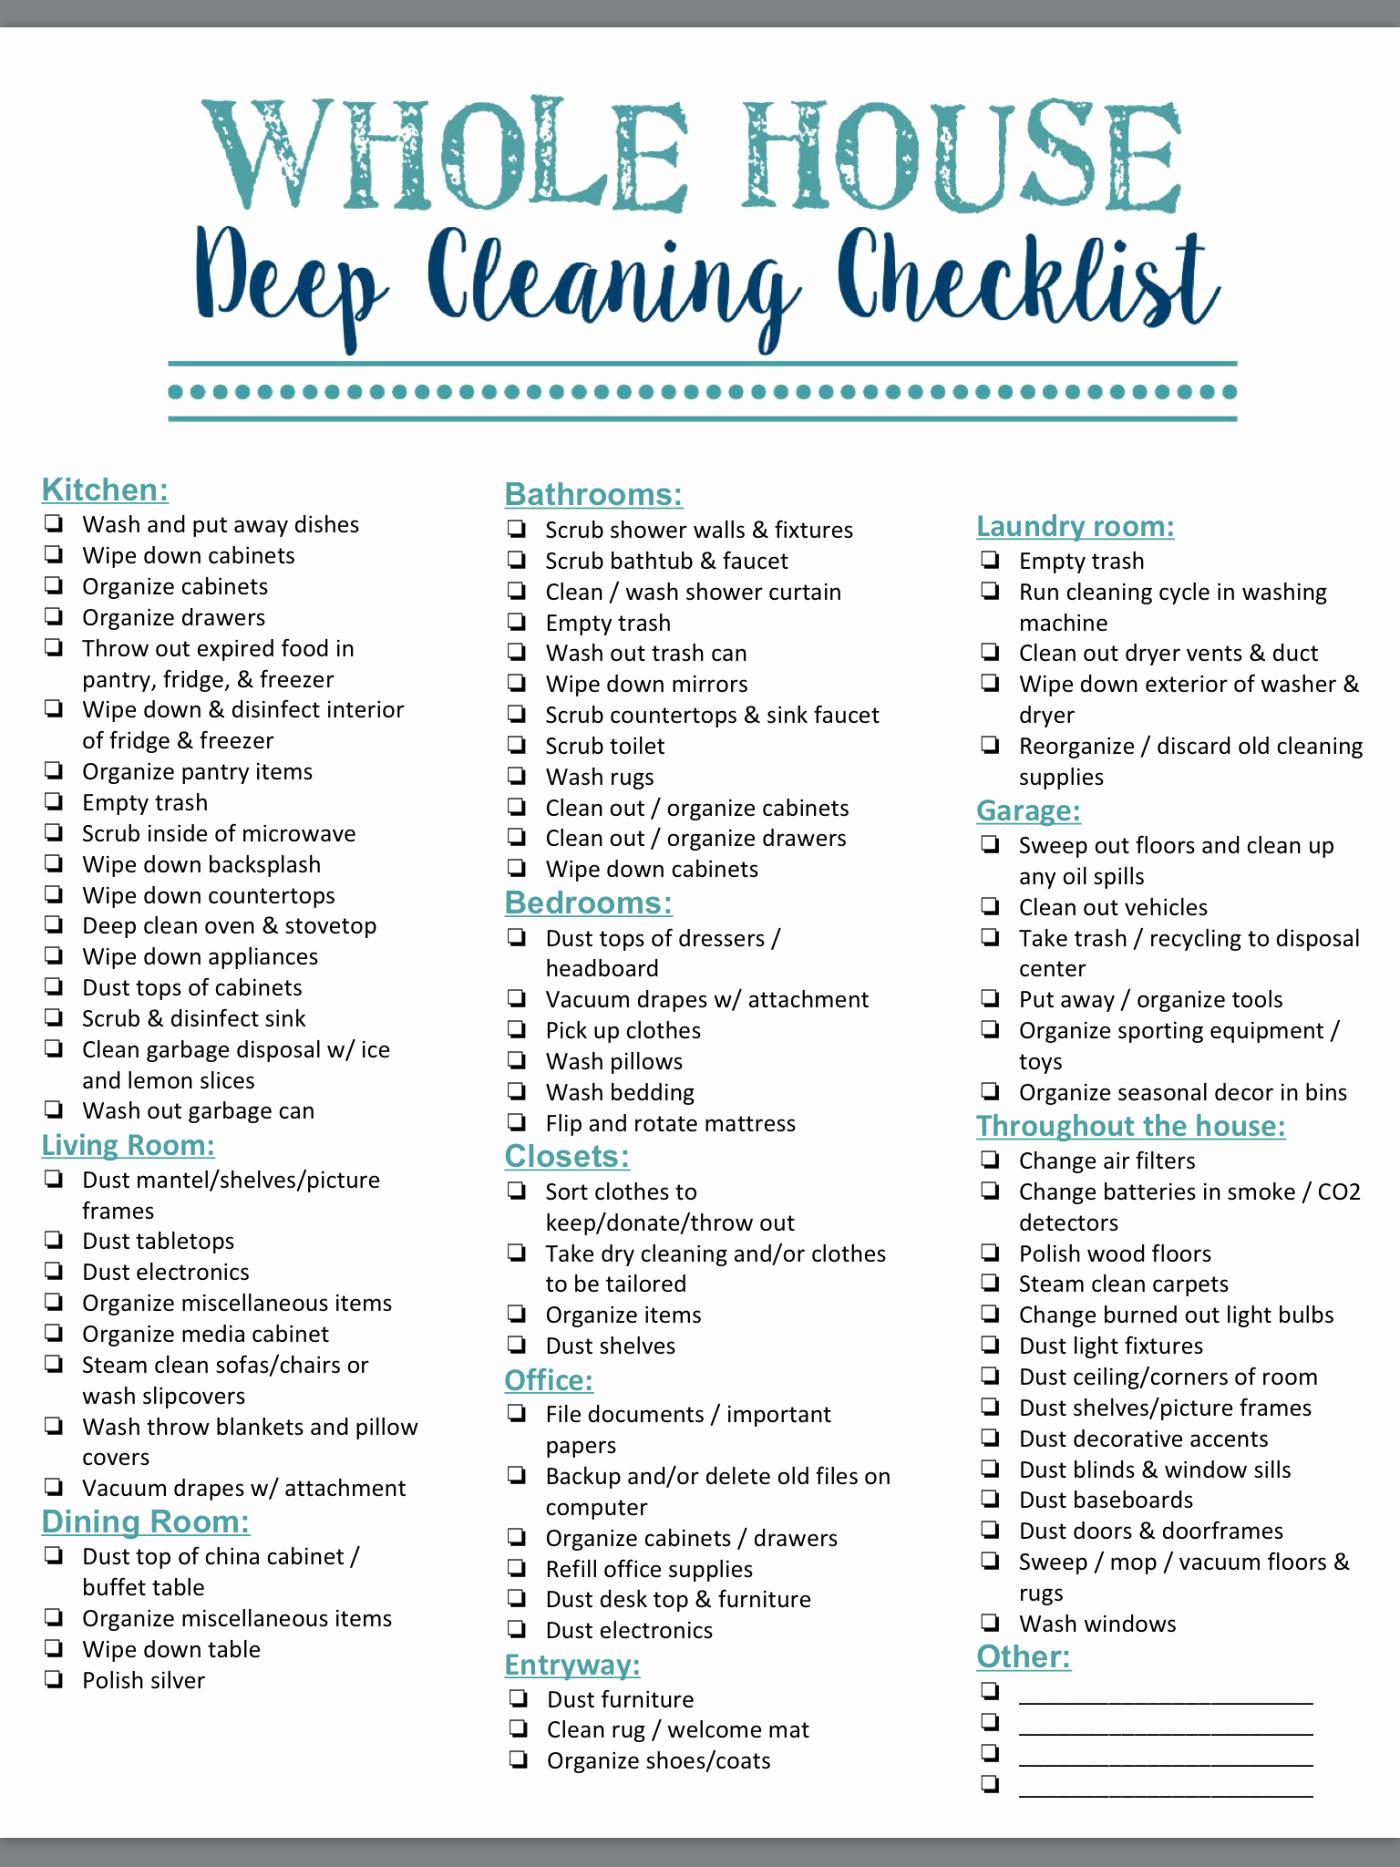 House Cleaning Schedule Template Inspirational 40 Helpful House Cleaning Checklists for You